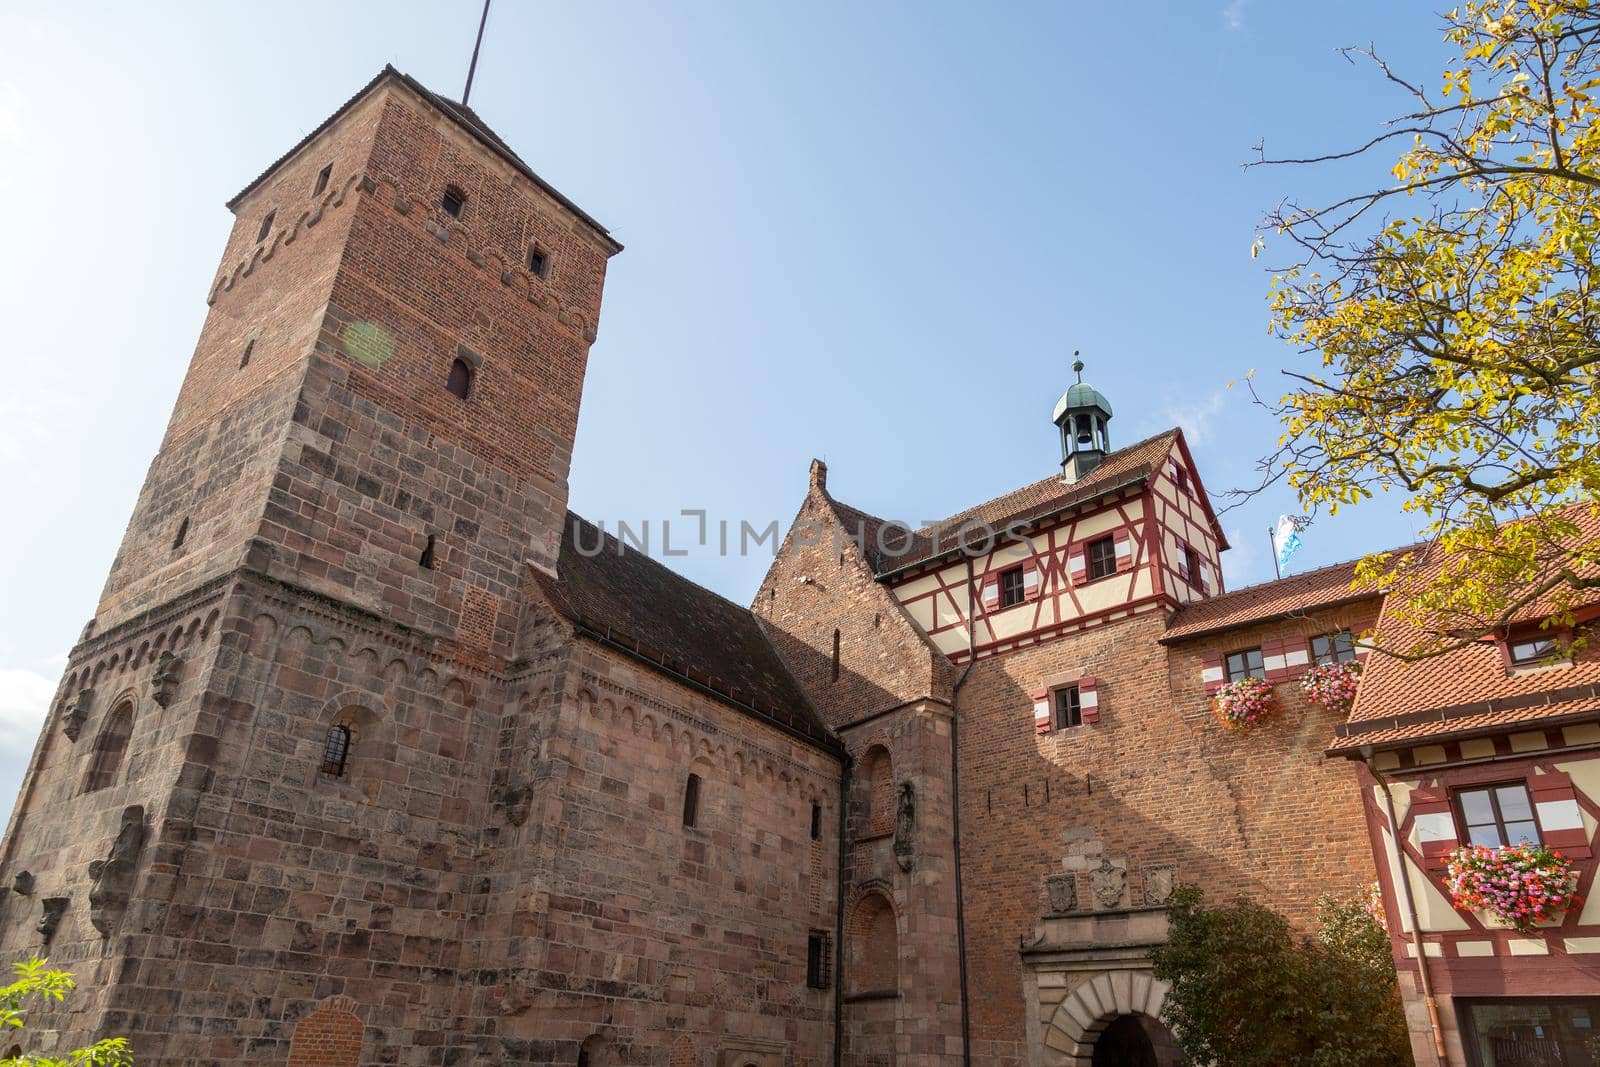 Historic tower and building of the Nuremberg castle, Bavaria, Germany  in autunm on a sunny day